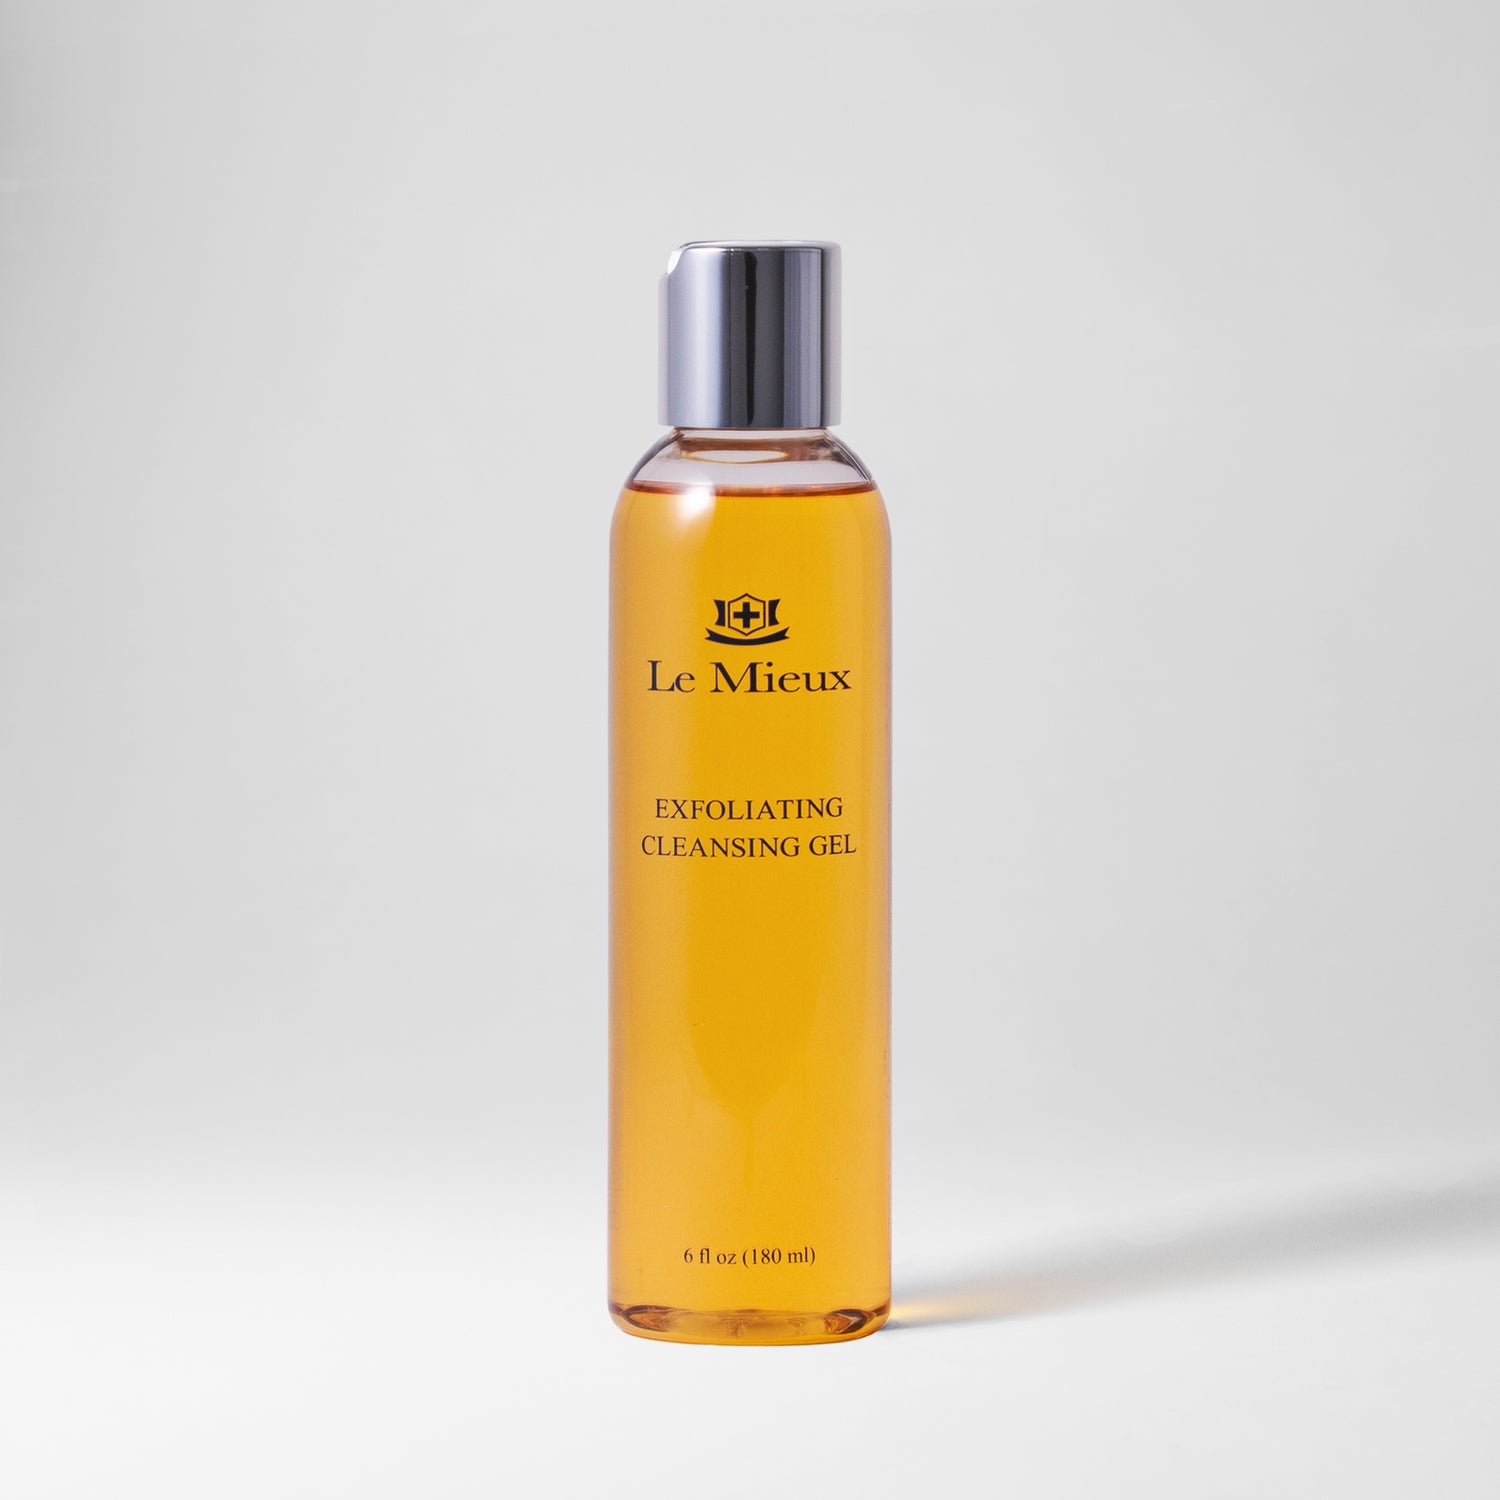  EXFOLIATING CLEANSING GEL from Le Mieux Skincare - featured